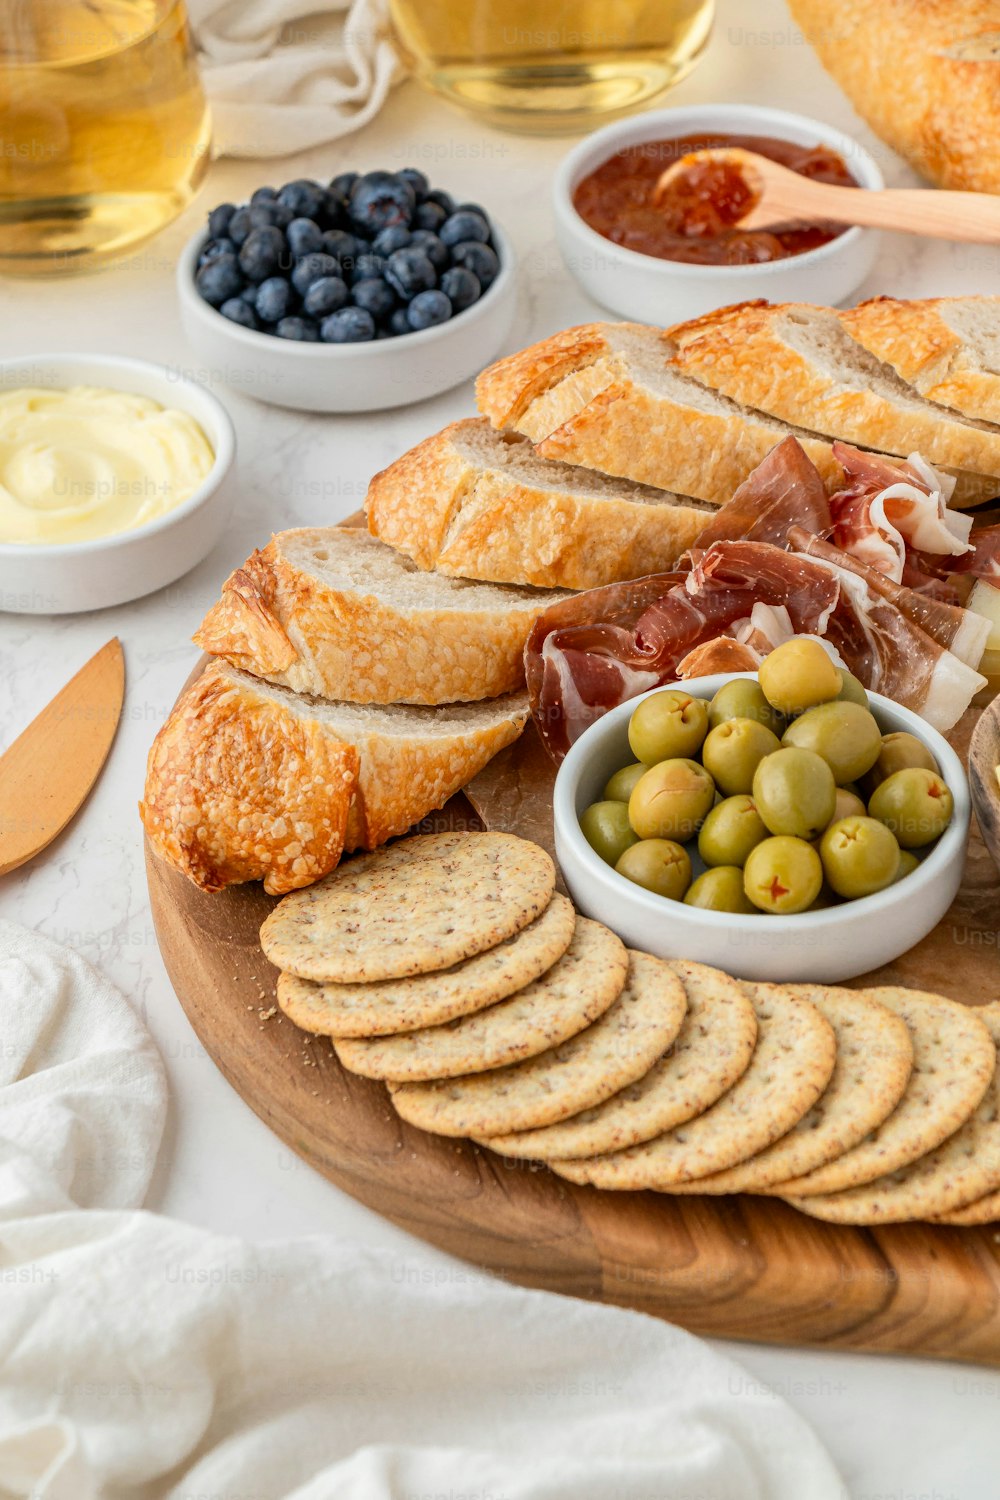 a platter of bread, olives, bread slices, cheese, and bread